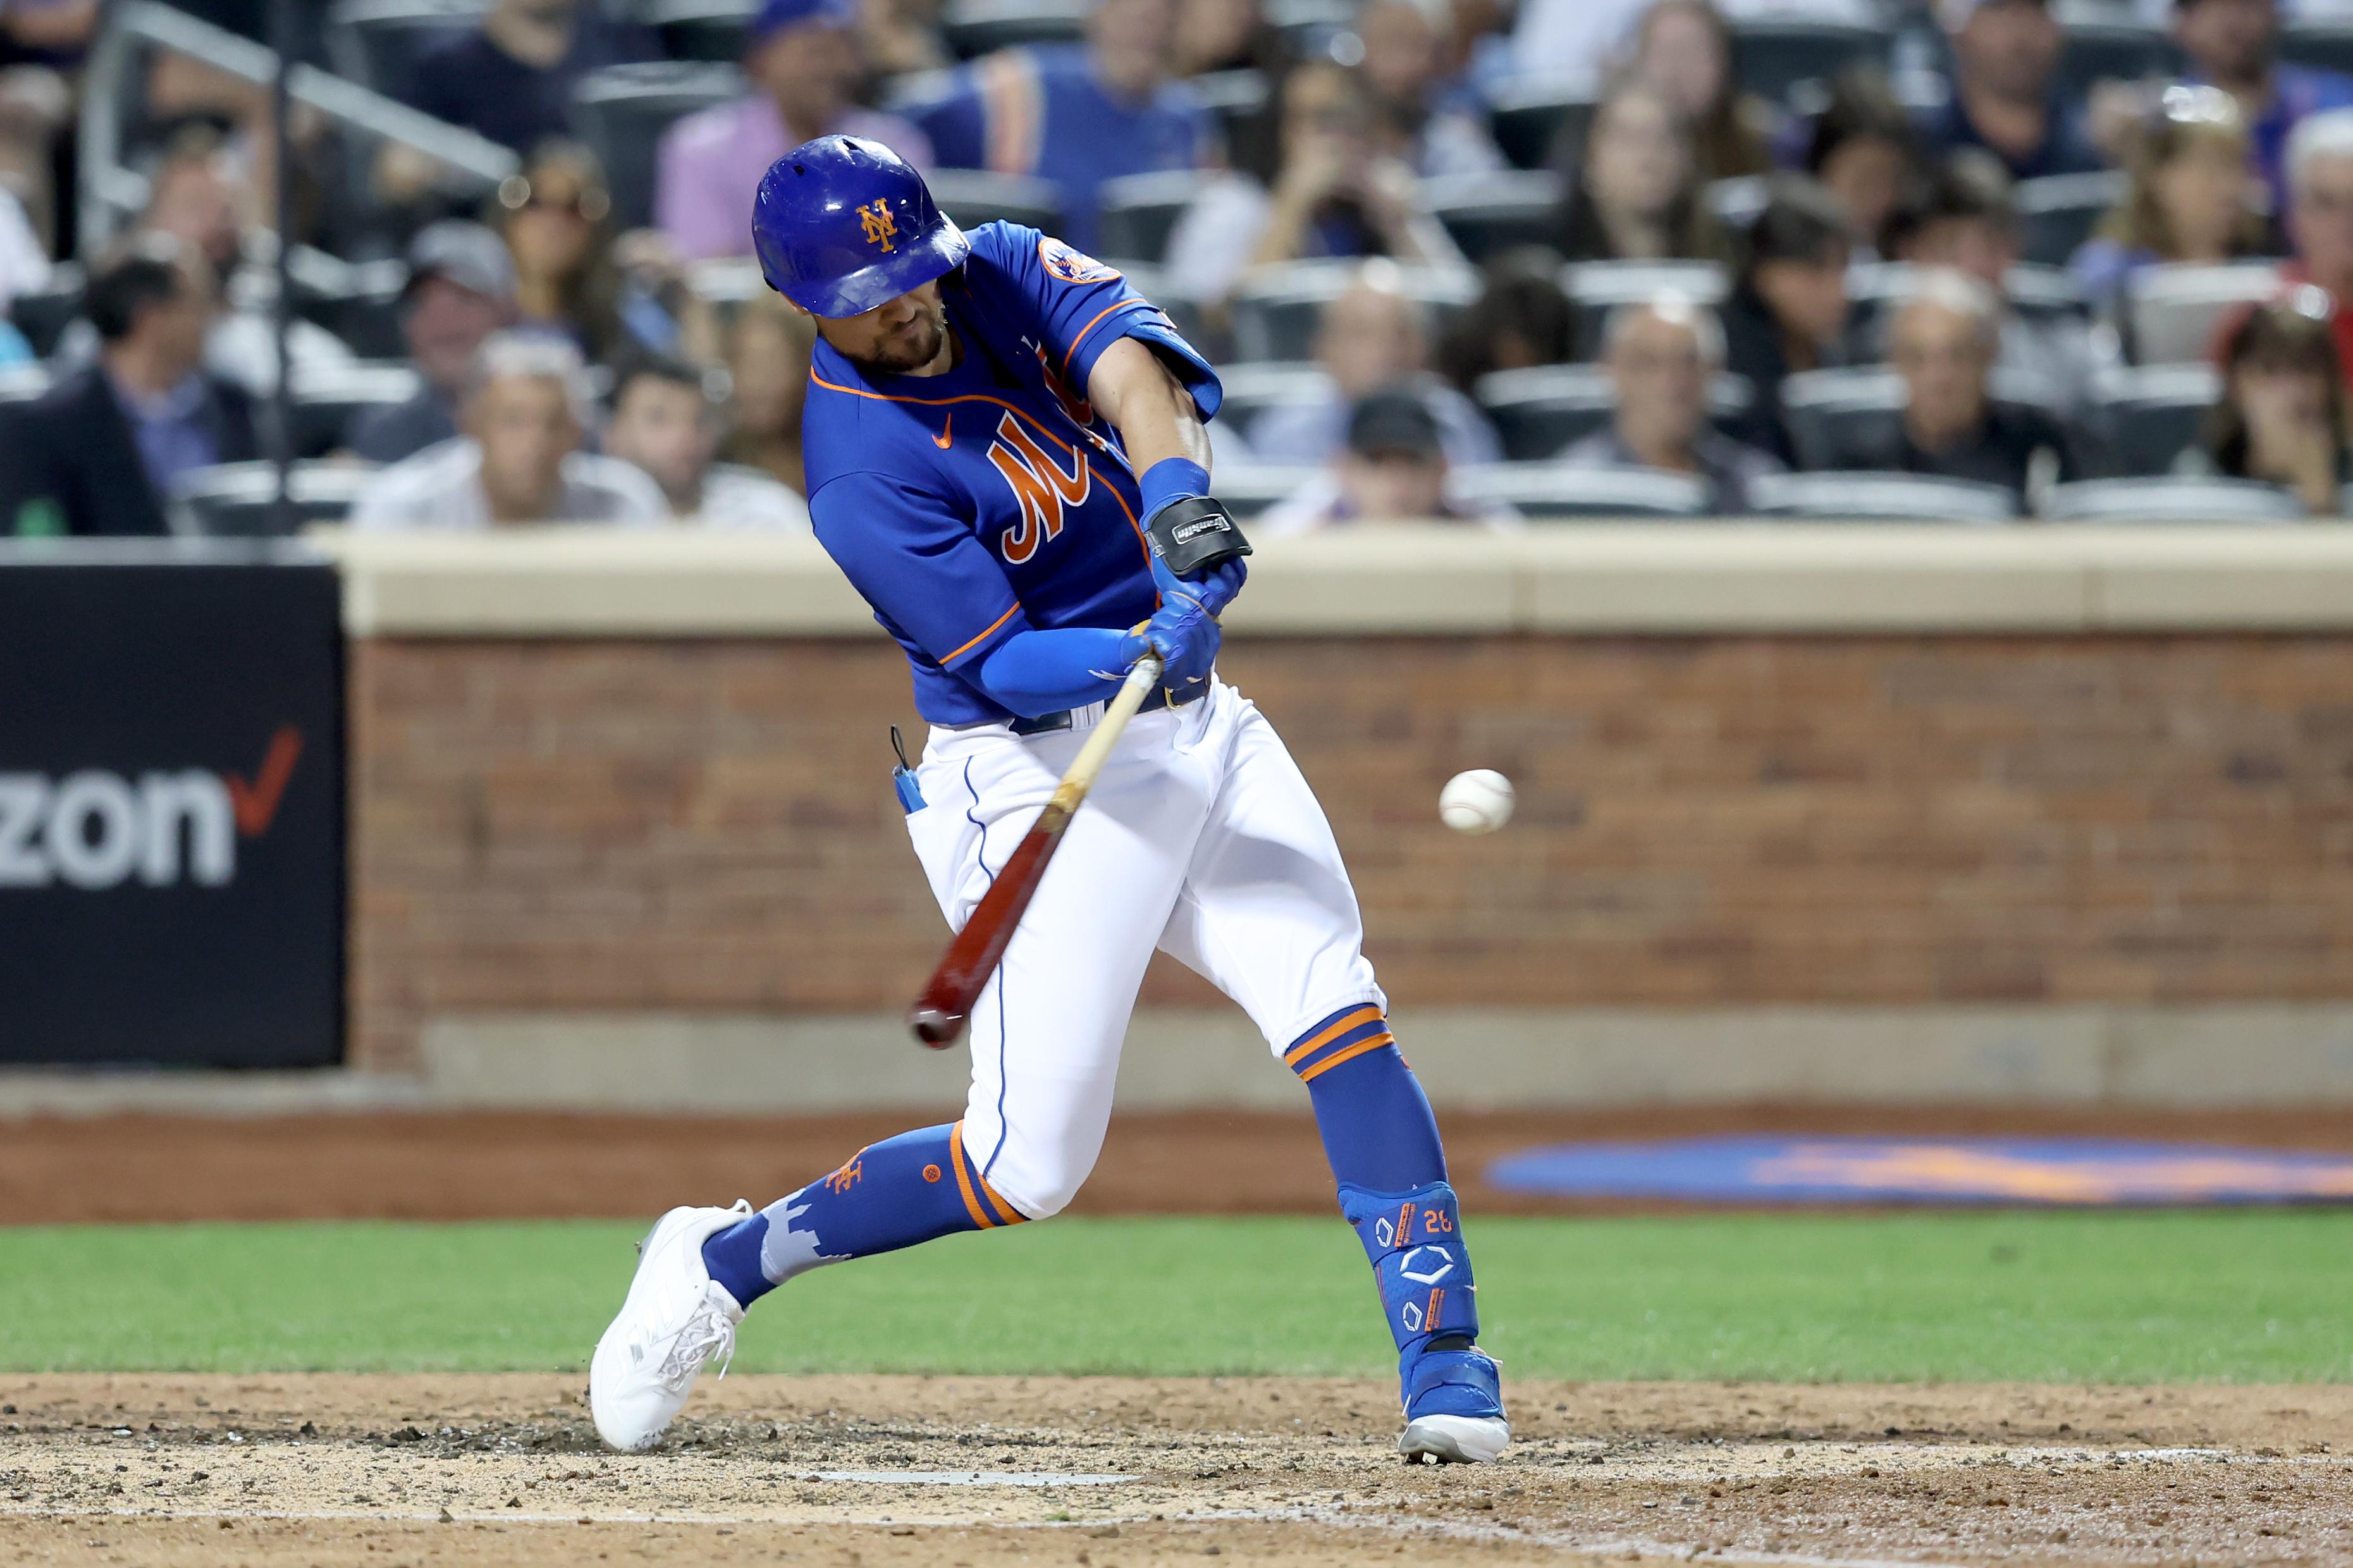 New York Mets designated hitter J.D. Davis (28) hits a grand slam against the Miami Marlins during the fifth inning at Citi Field. / Brad Penner-USA TODAY Sports